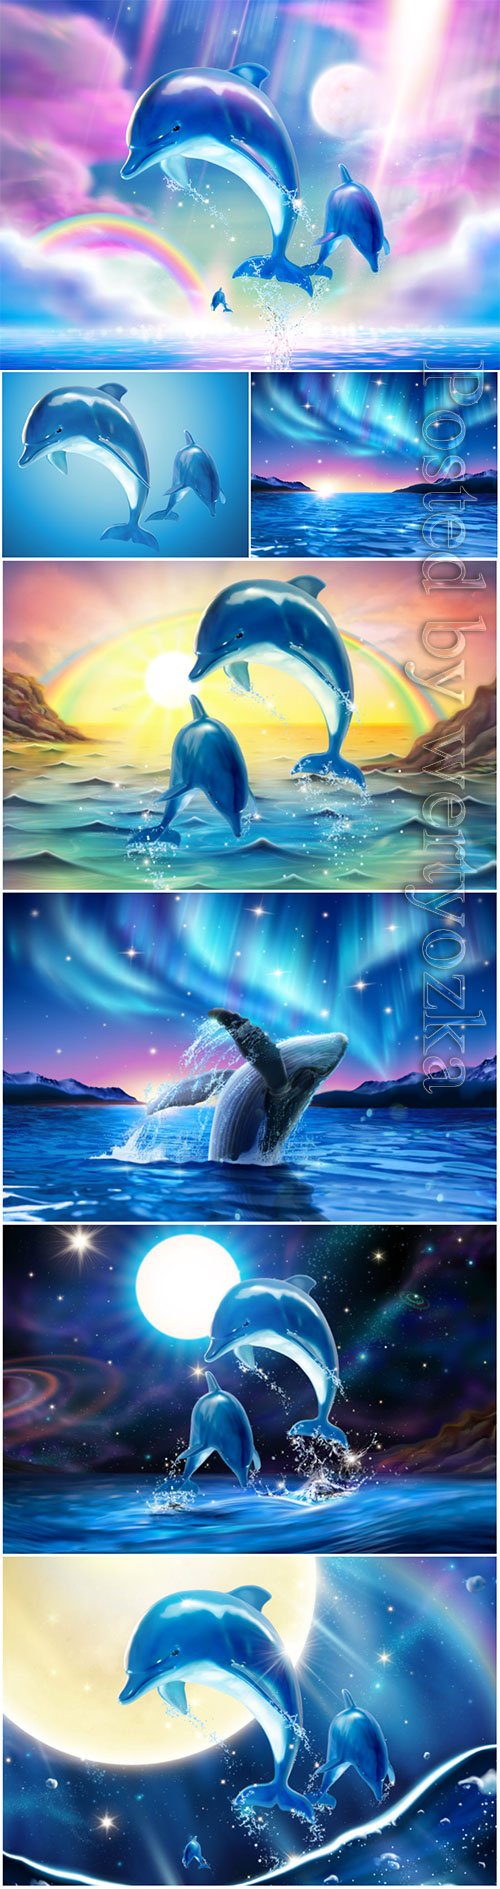 Dolphins in vector, marine landscape